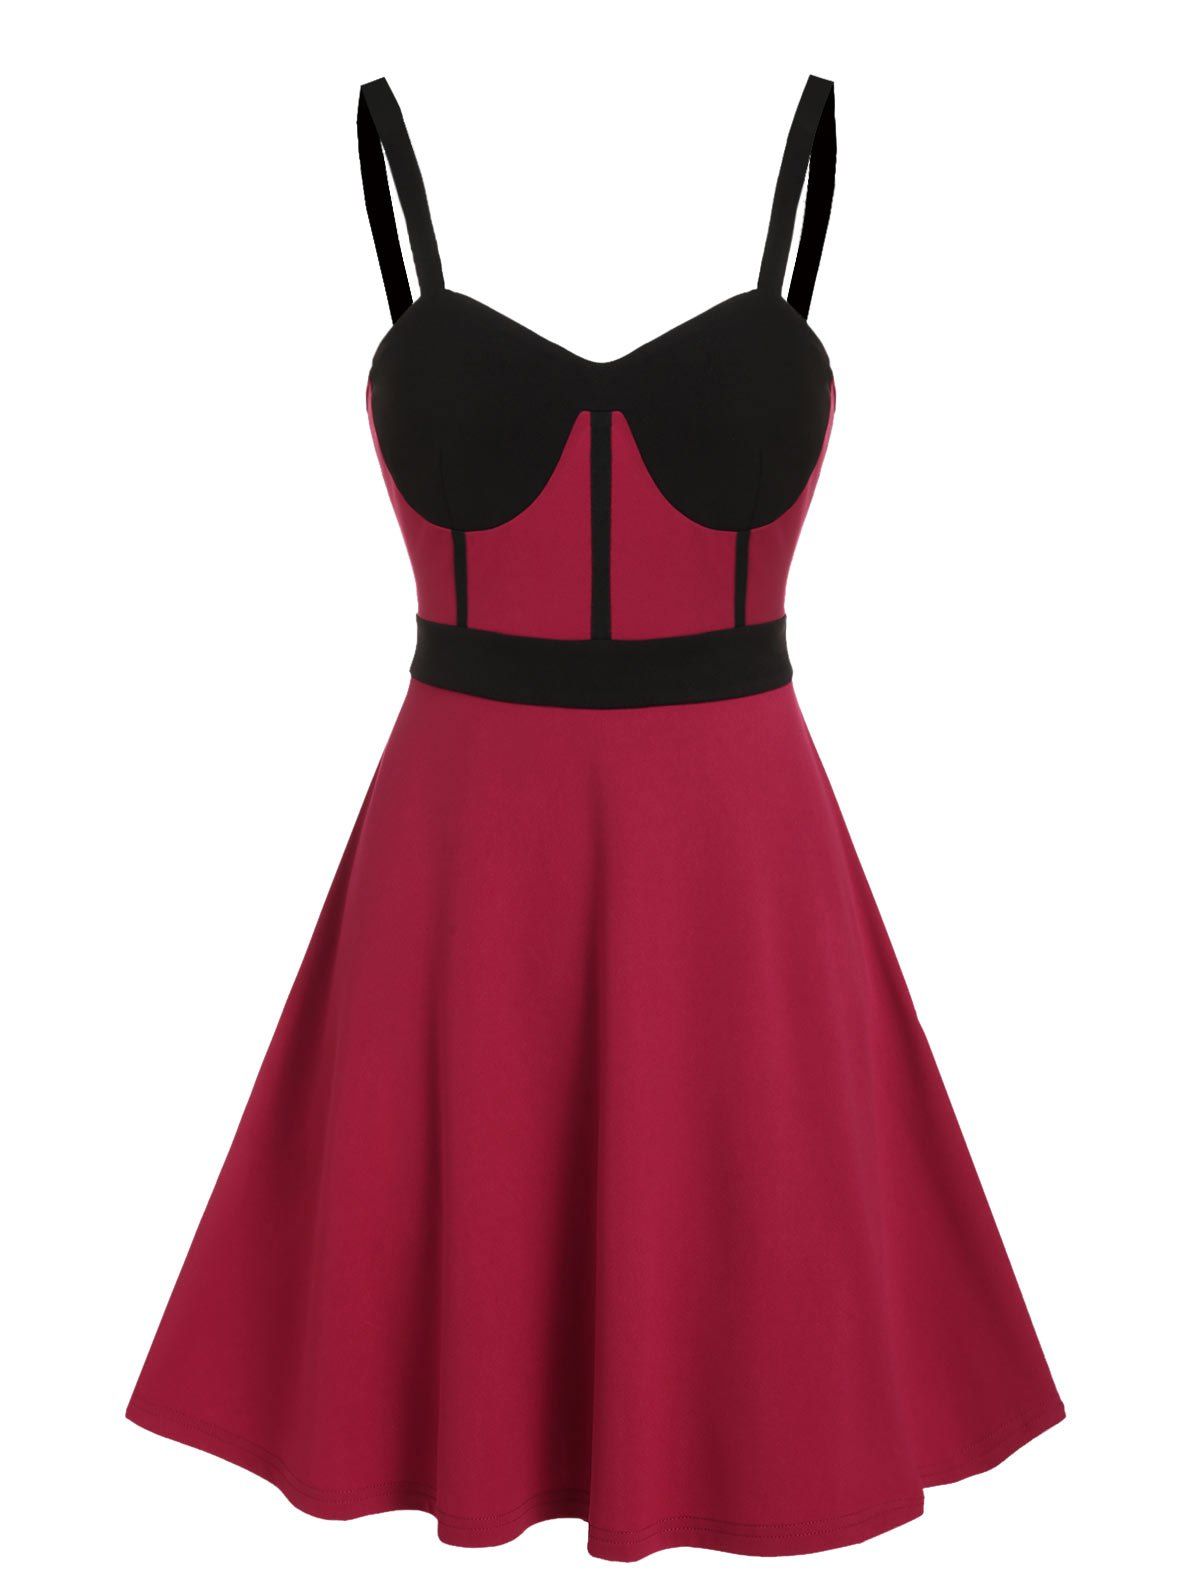 Two Tone Bowknot A Line Party Dress - RED WINE M